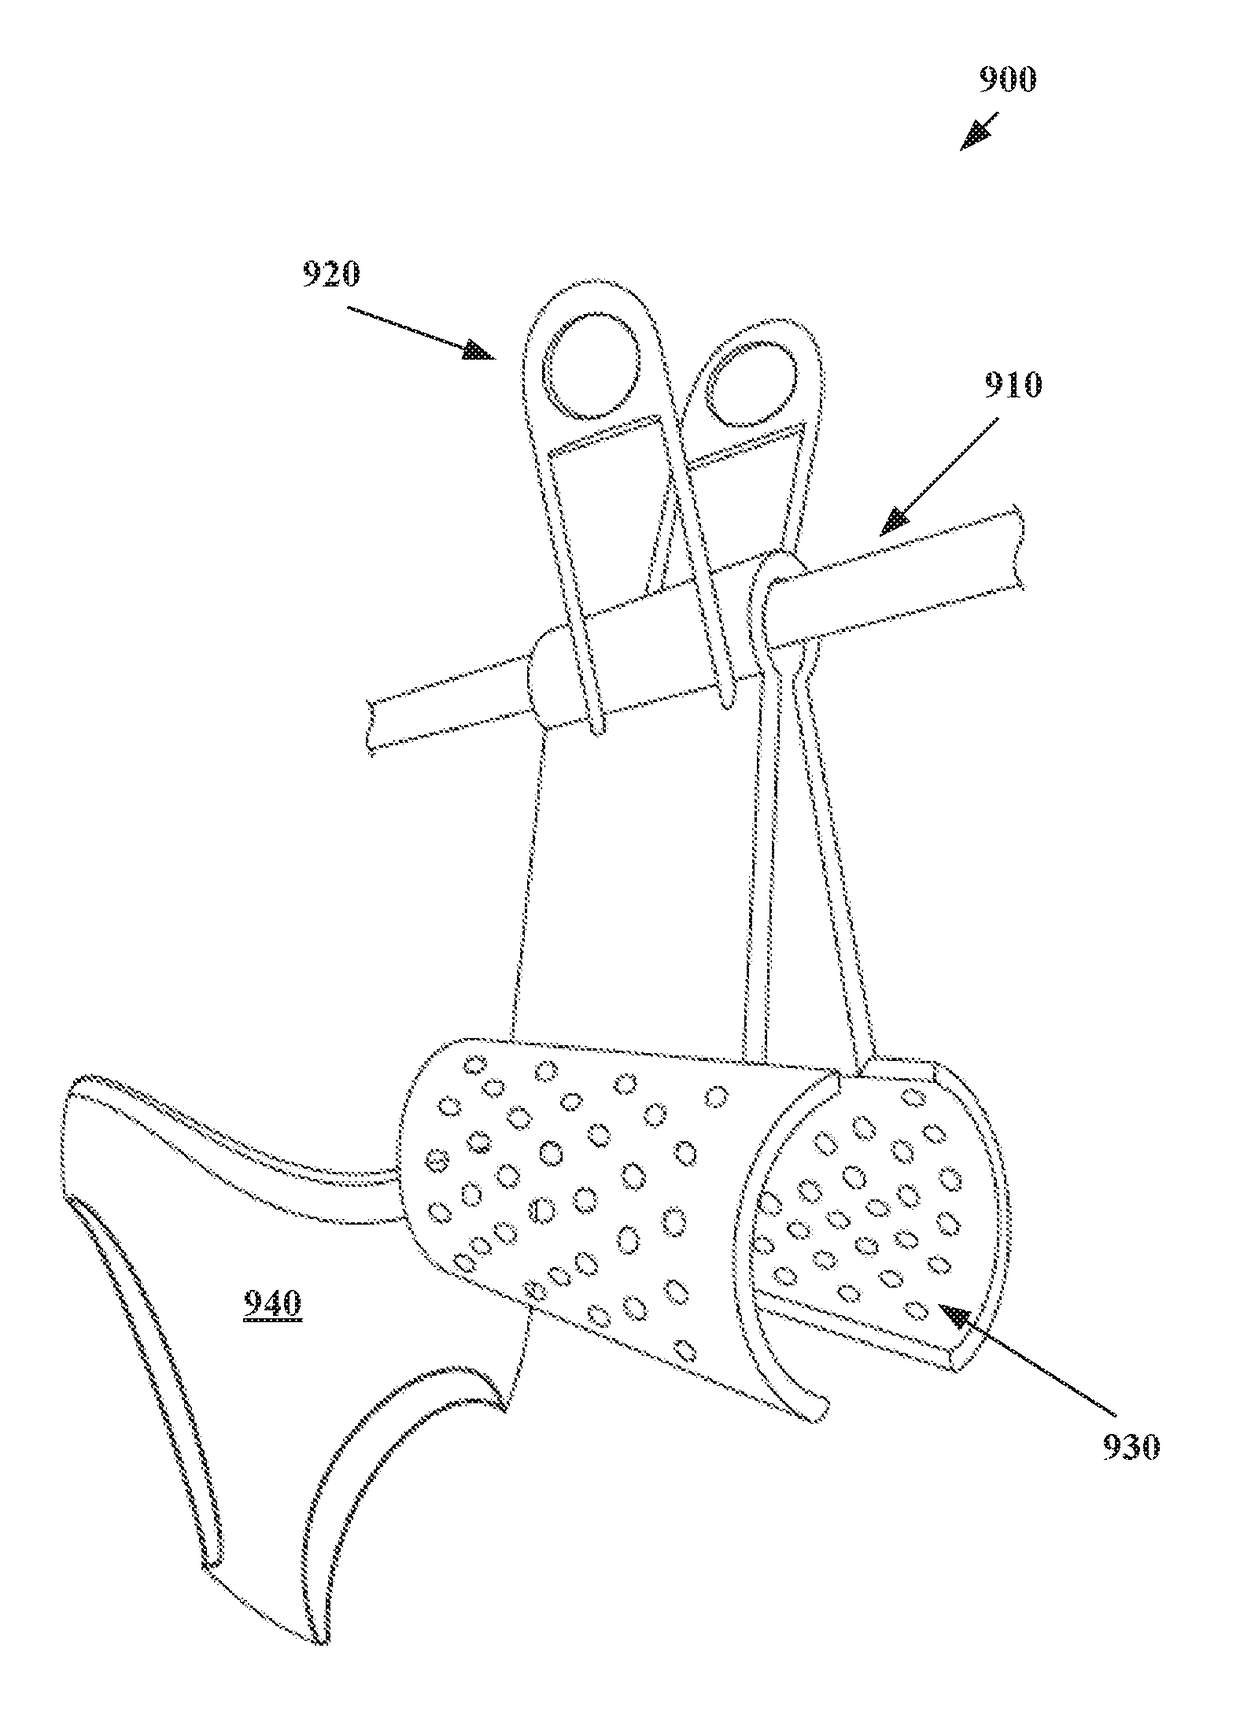 Clothes line assembly for washing and drying delicate items